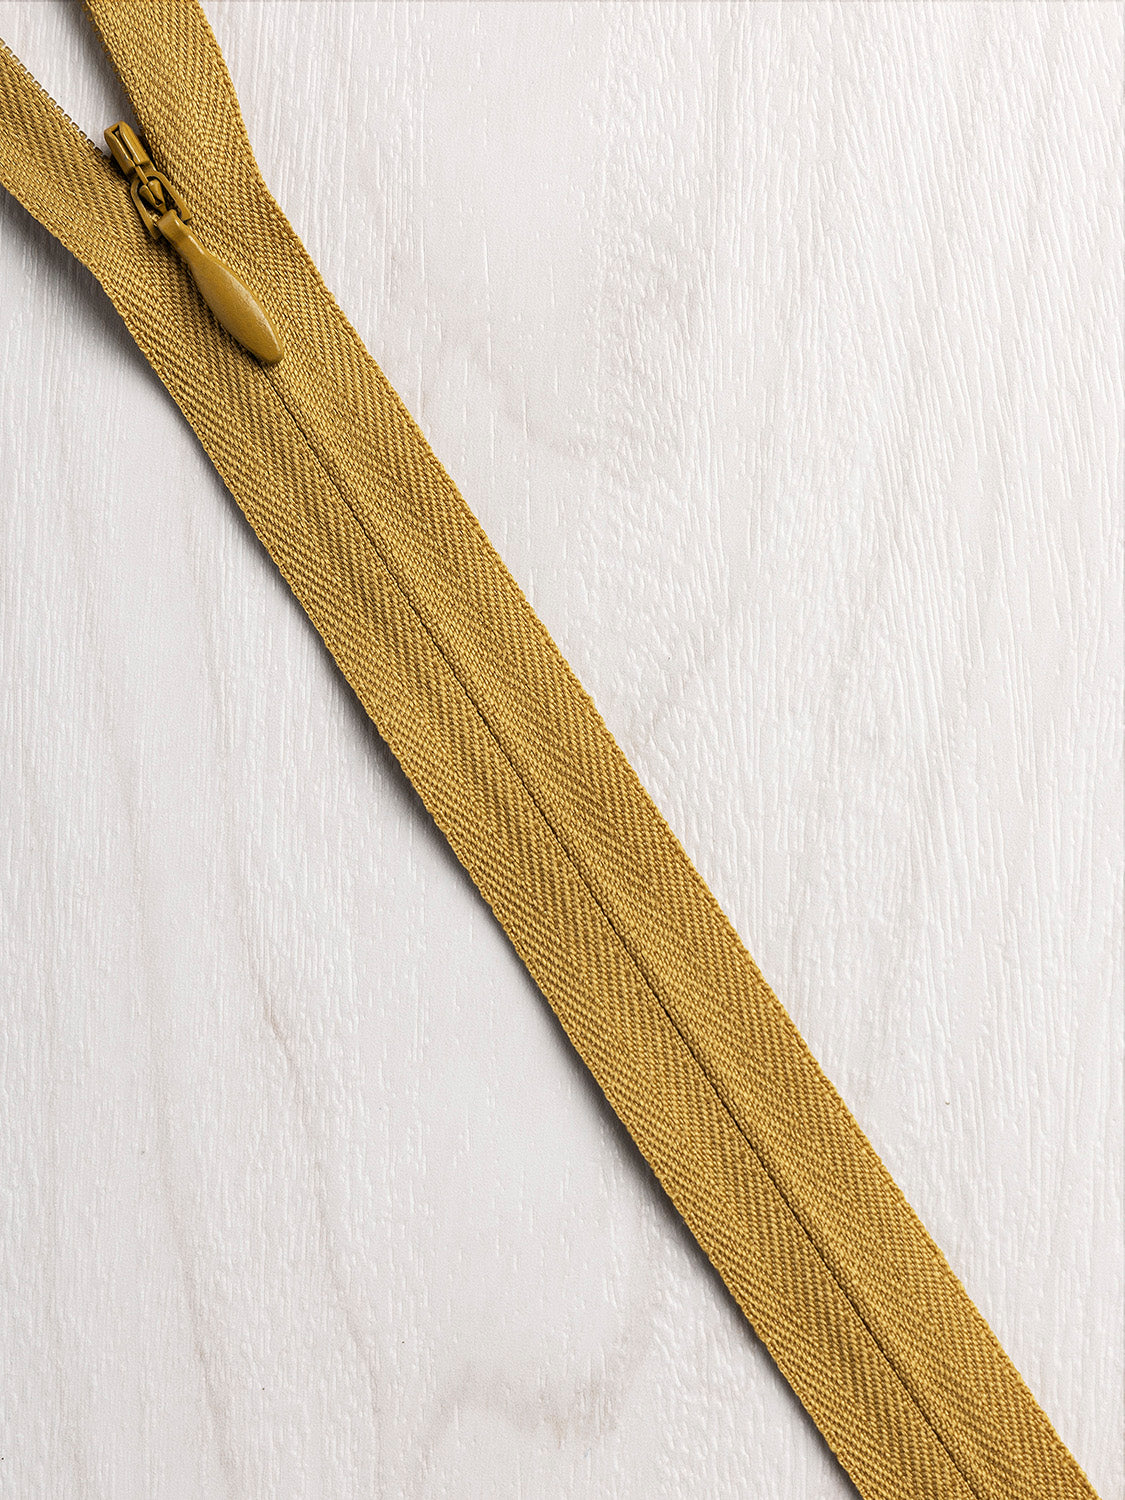 YKK Zippers: Here's Why They're on Everything